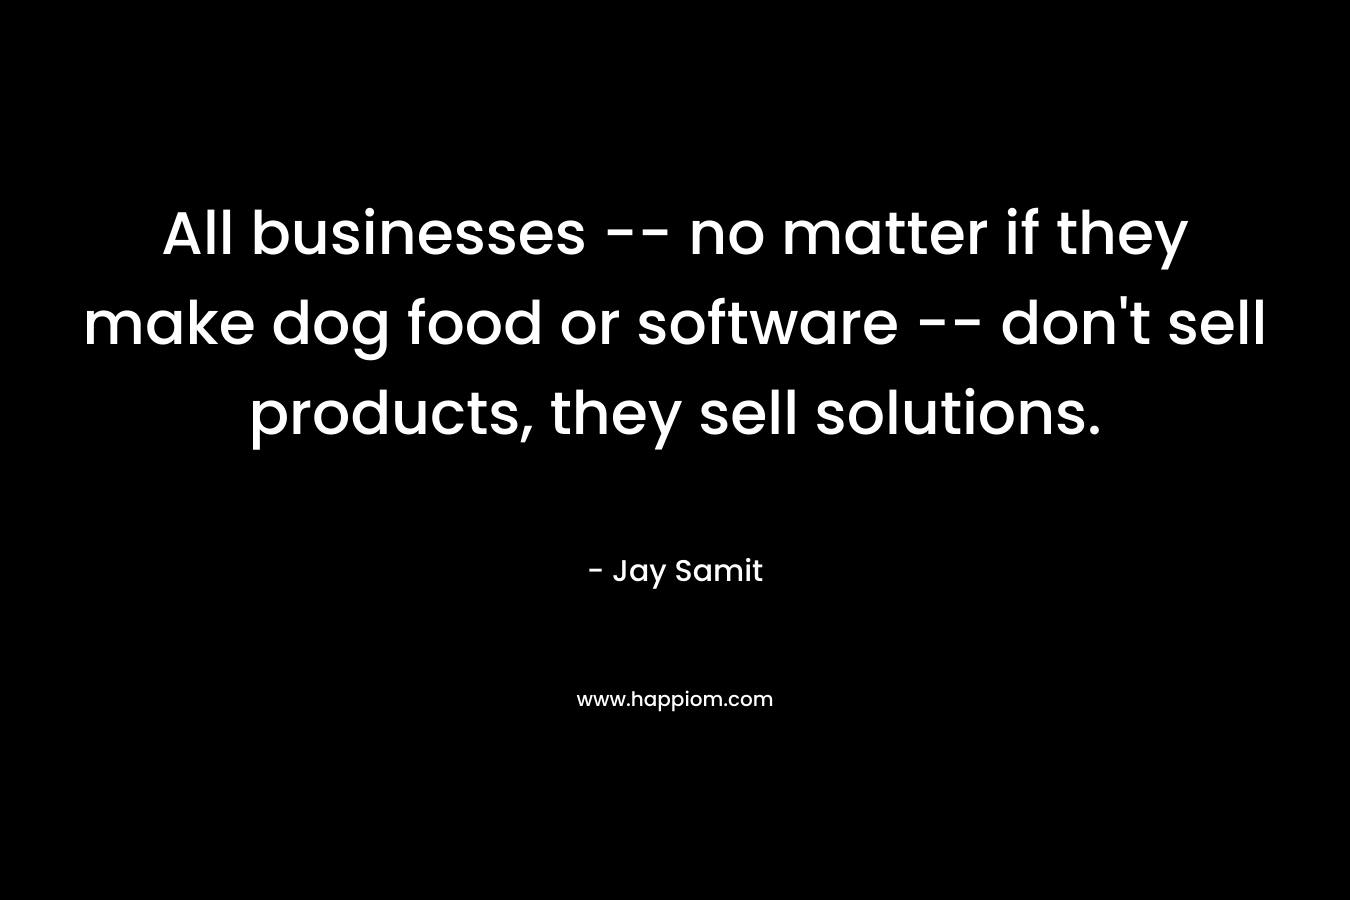 All businesses — no matter if they make dog food or software — don’t sell products, they sell solutions. – Jay Samit